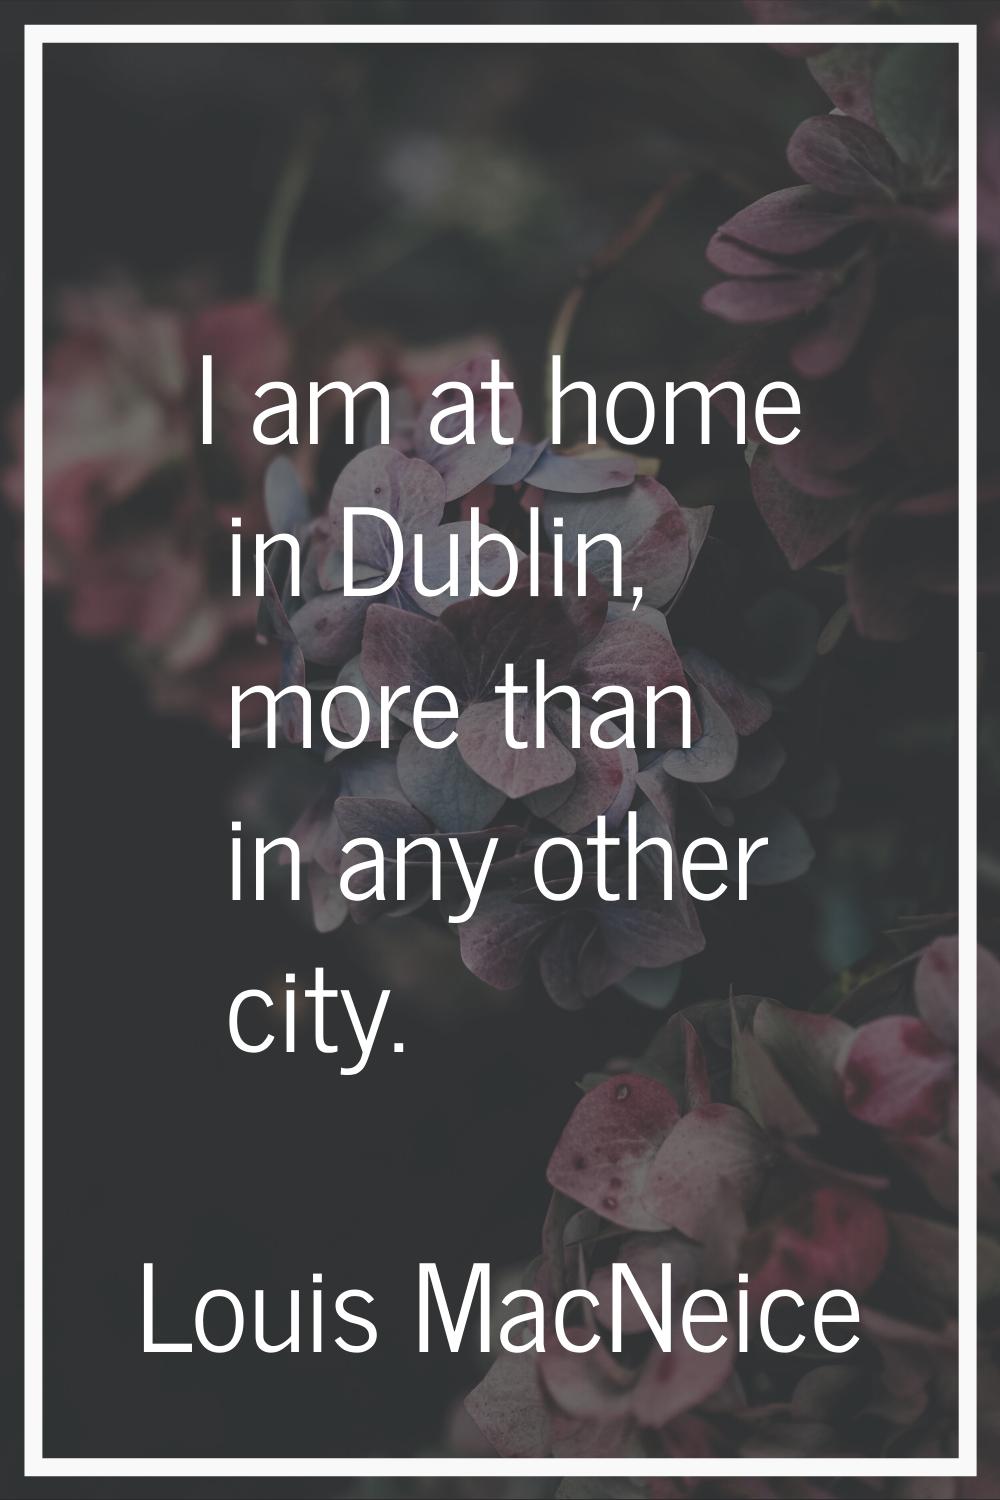 I am at home in Dublin, more than in any other city.